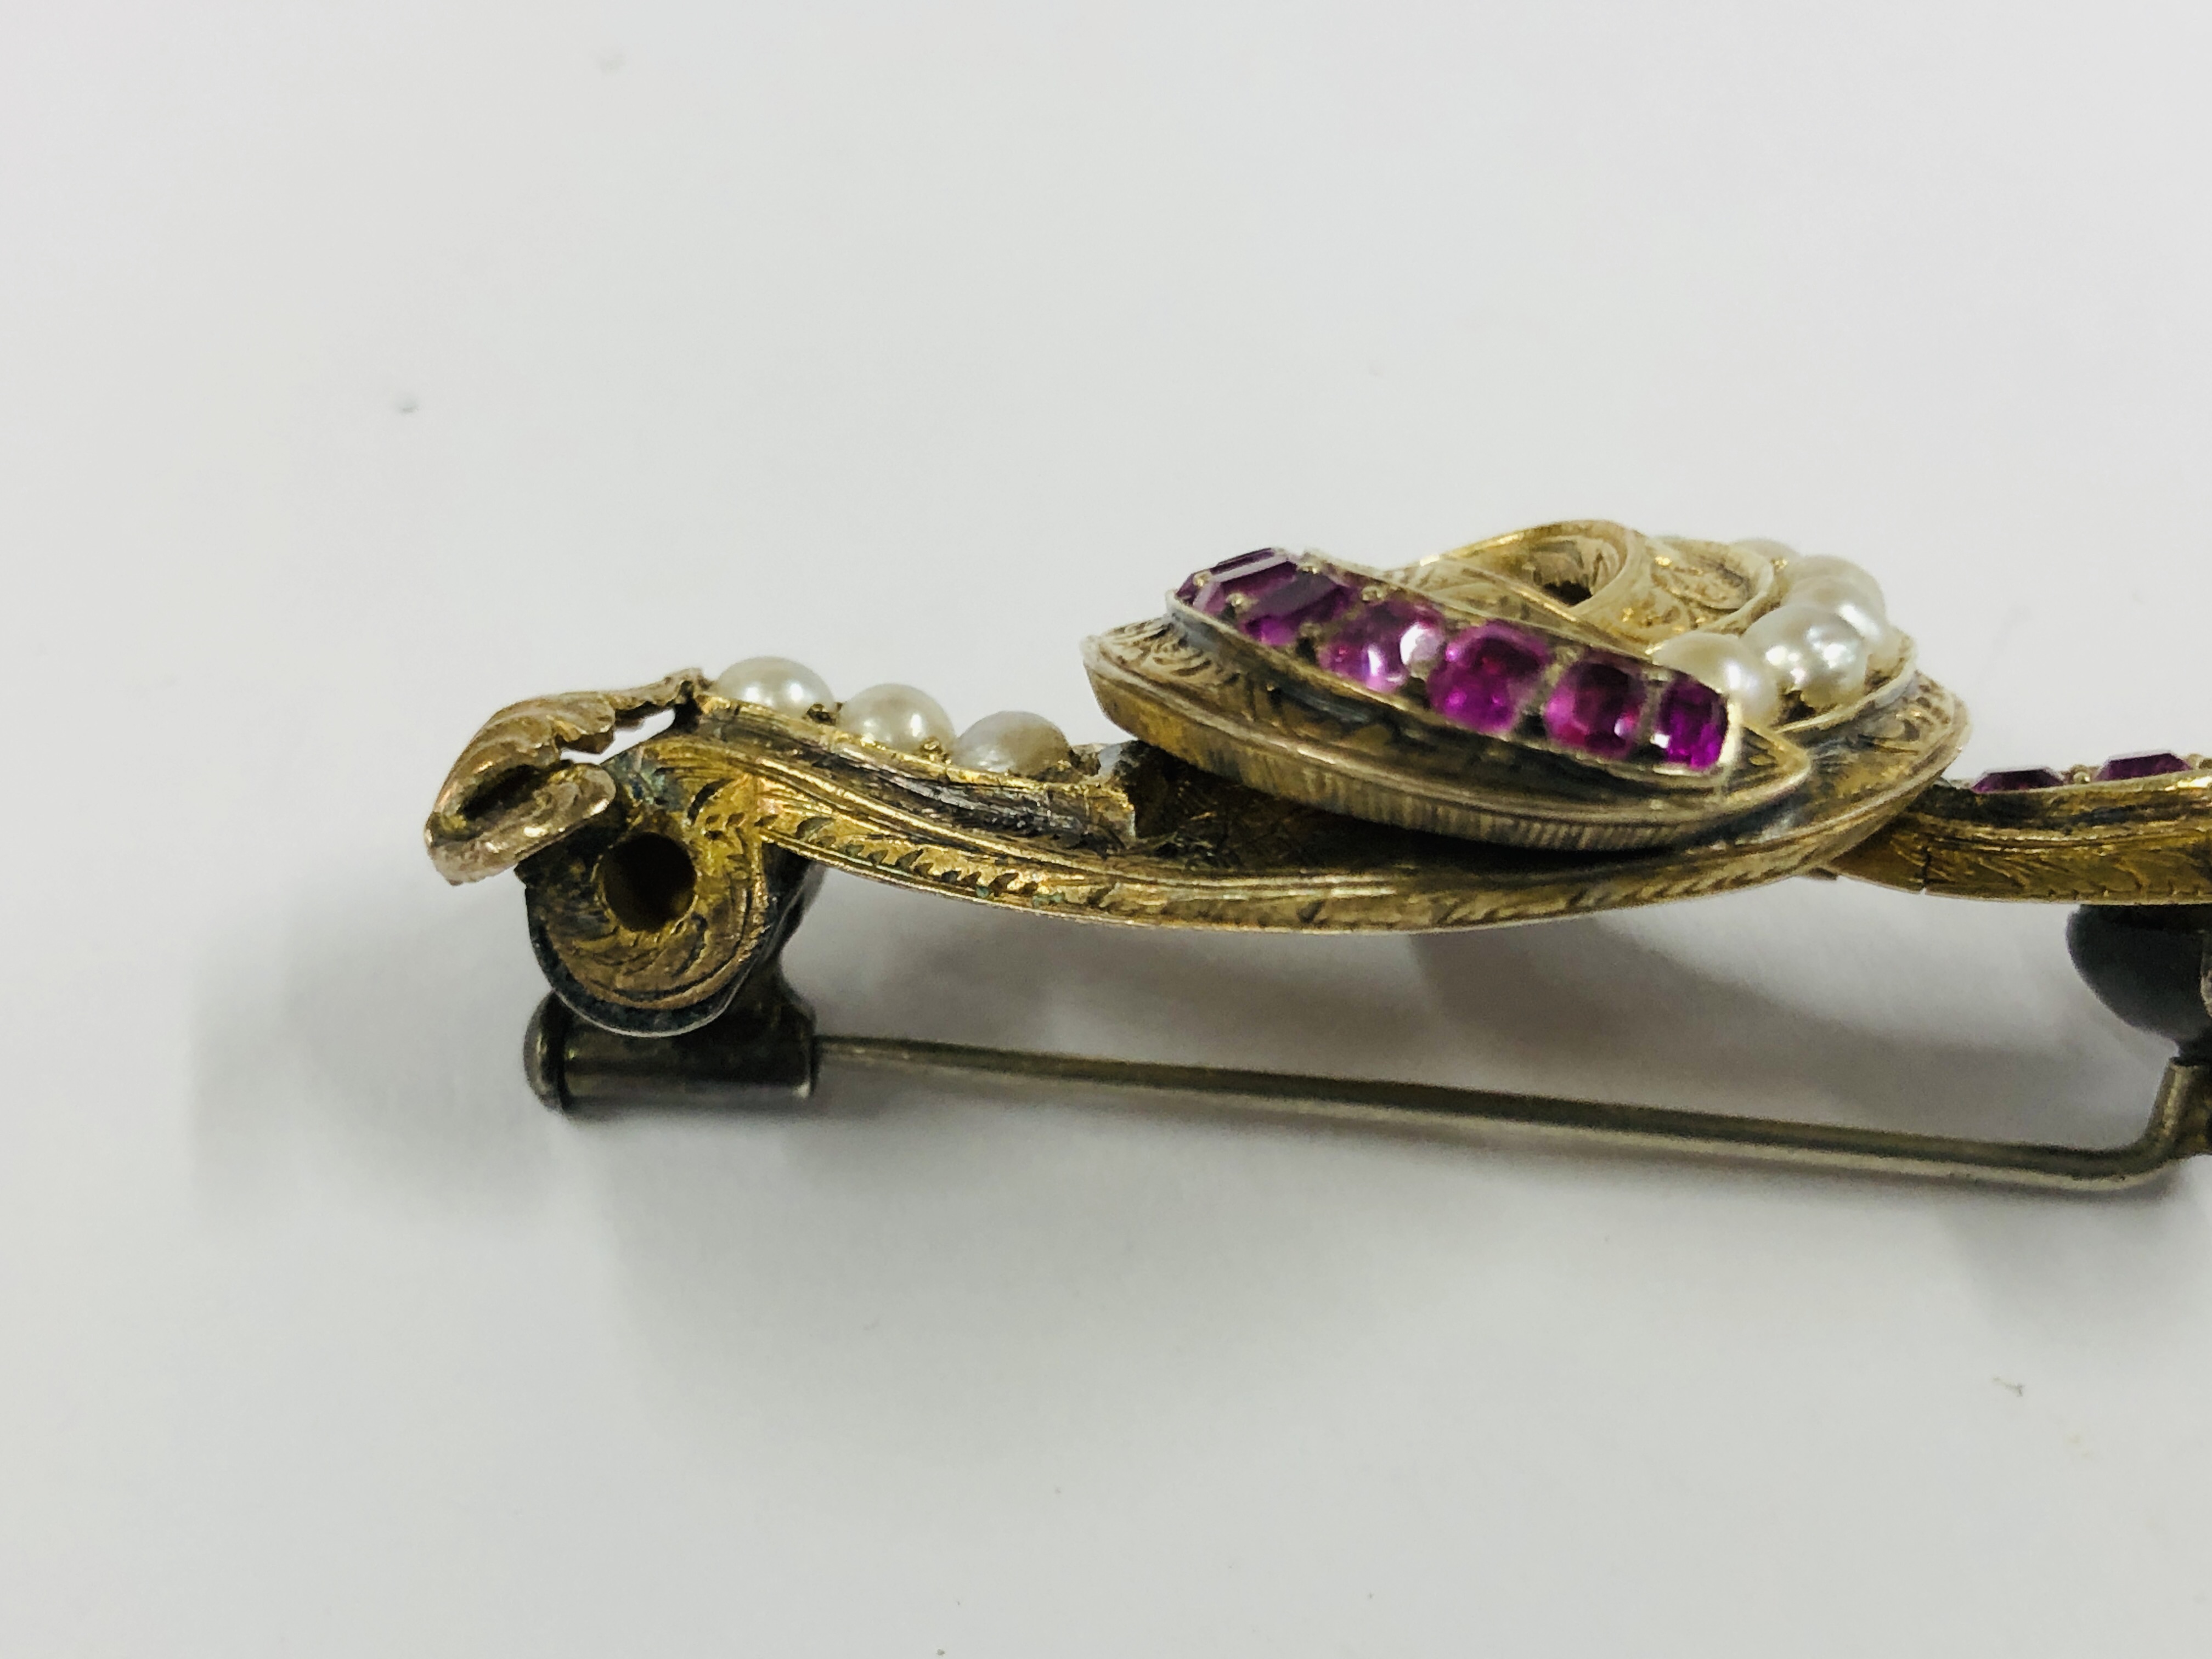 AN ANTIQUE GILT METAL PENDANT BROOCH SET WITH GARNETS & SEED PEARLS - L 5CM. - Image 8 of 11